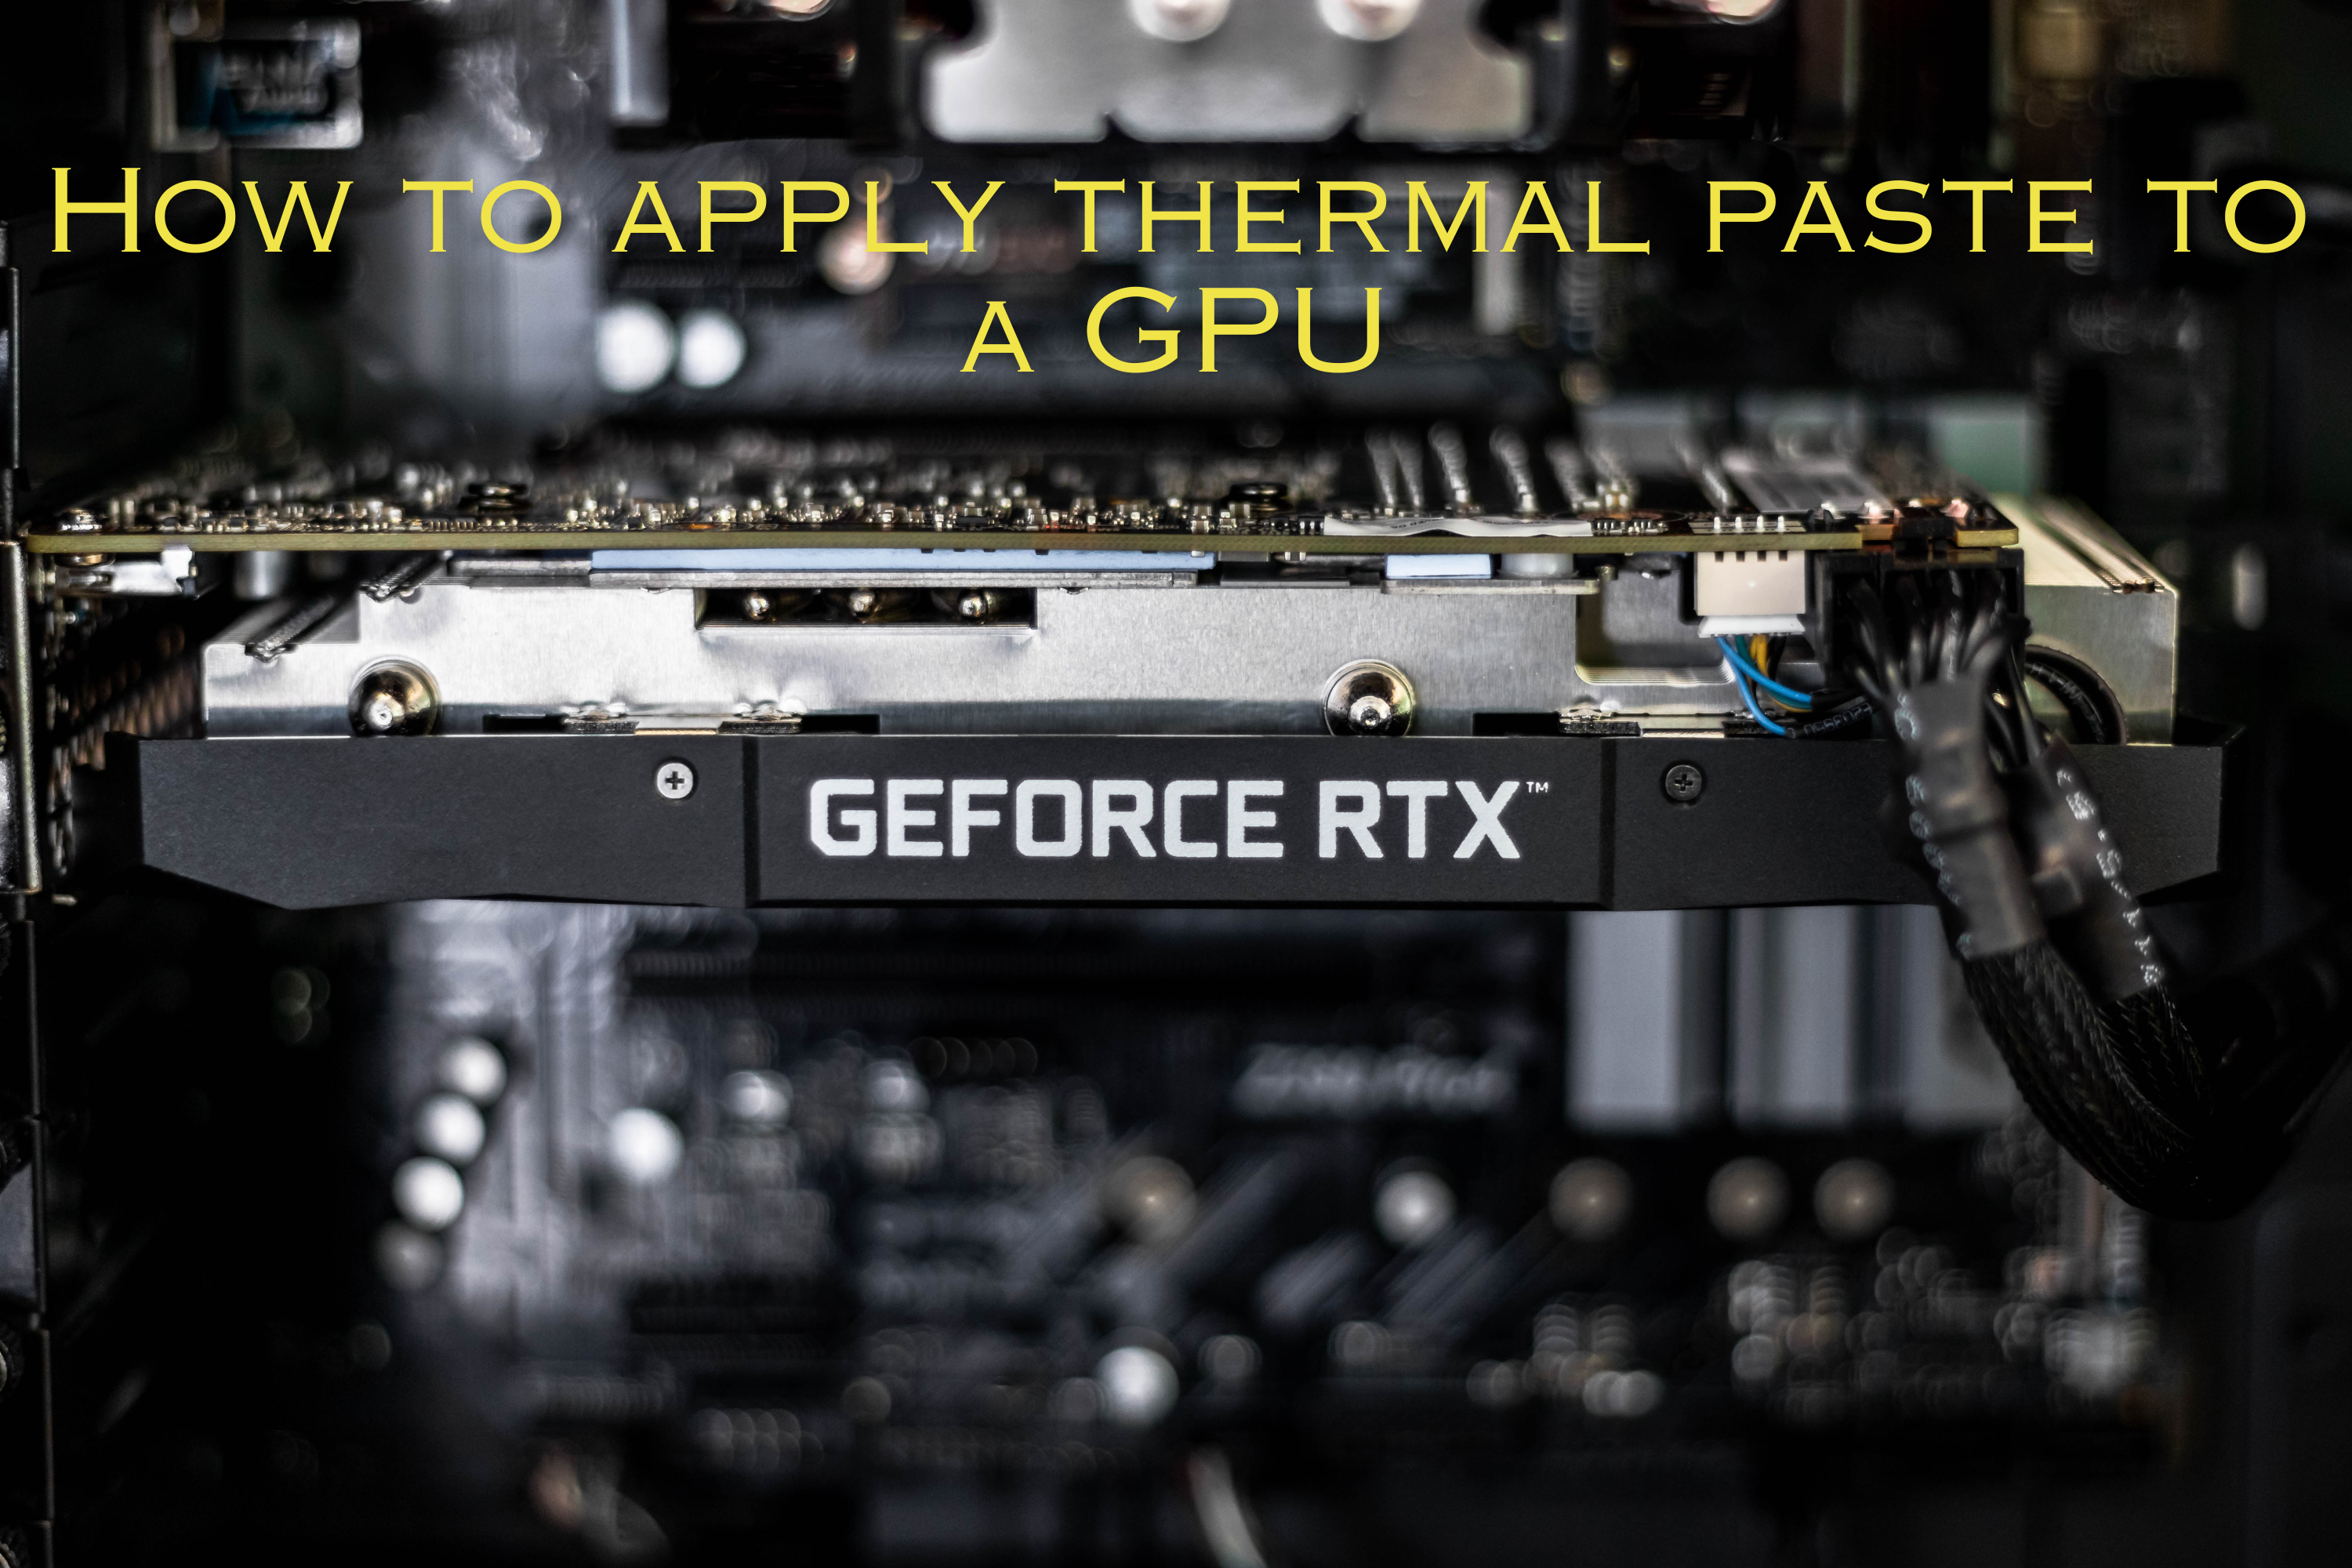 A GeForce RTX graphics card with a title 